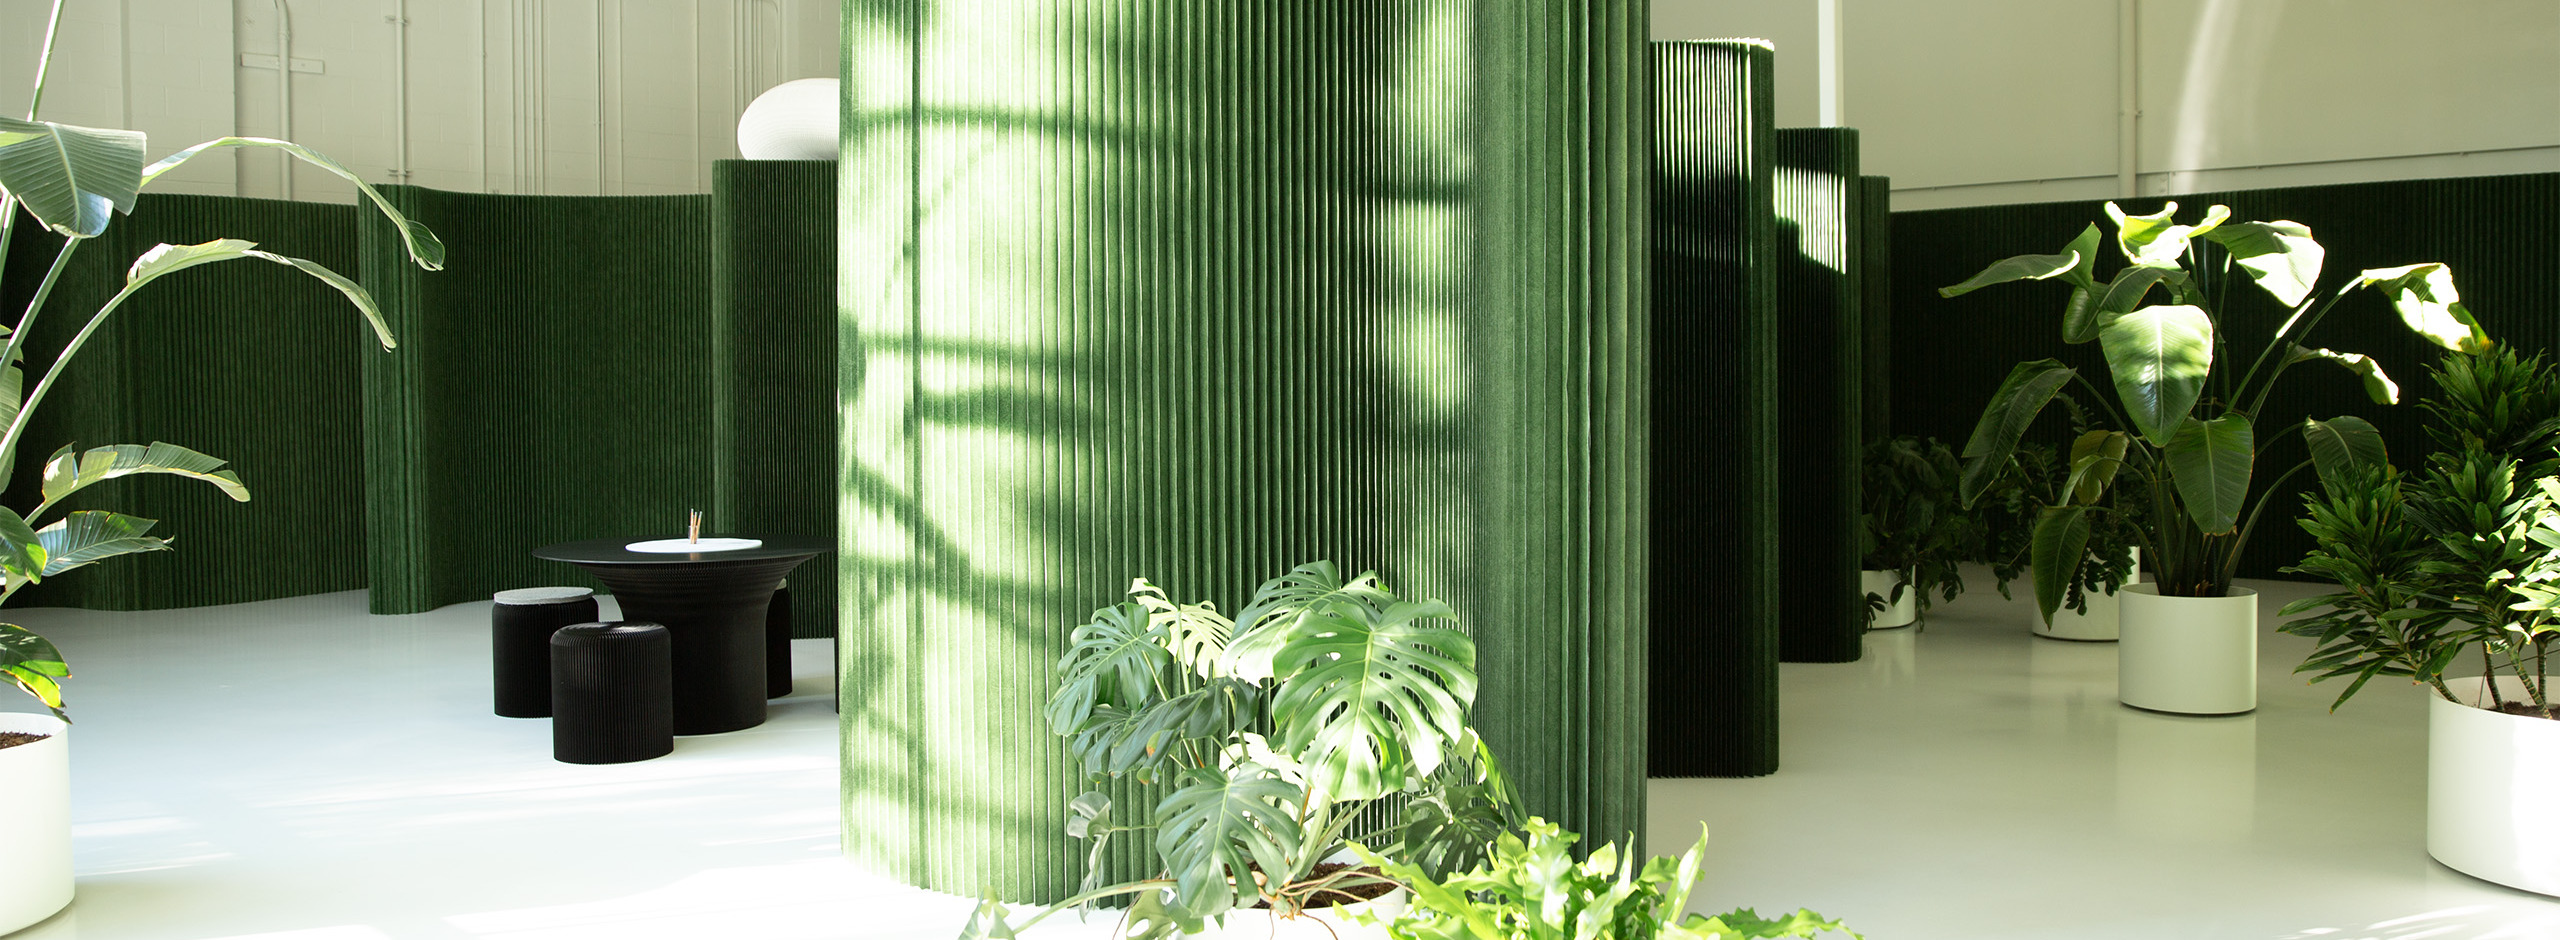 green softwall,acoustic office wall,designing with plants,Pantone 17-0230,molo